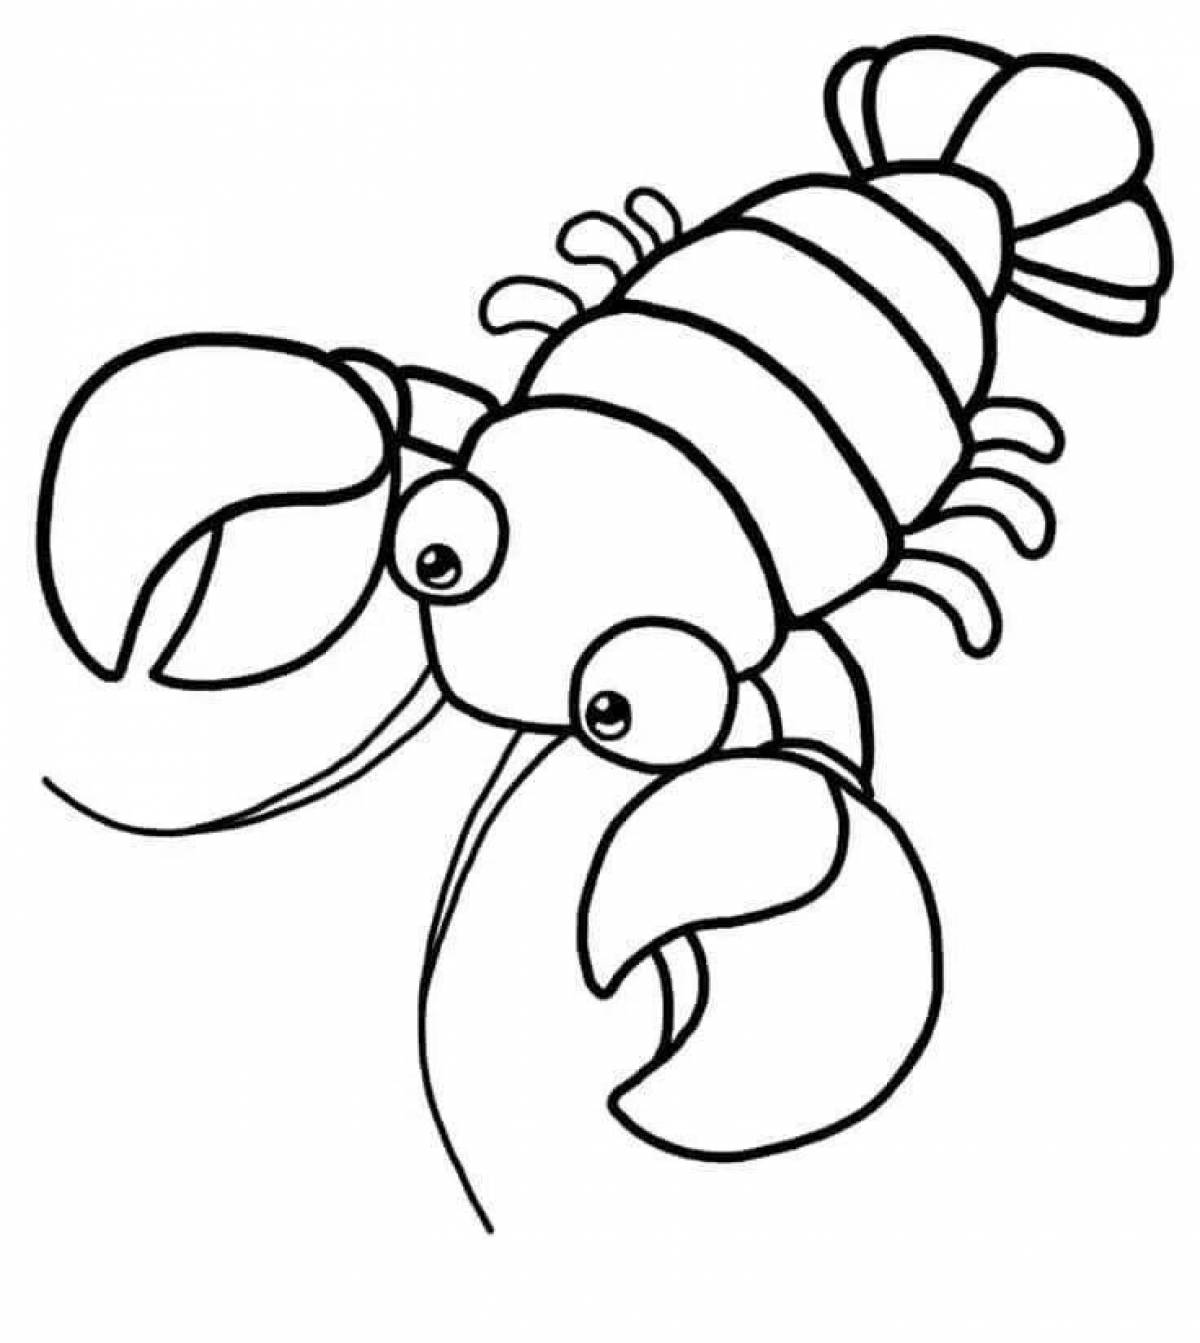 Coloring playful lobster